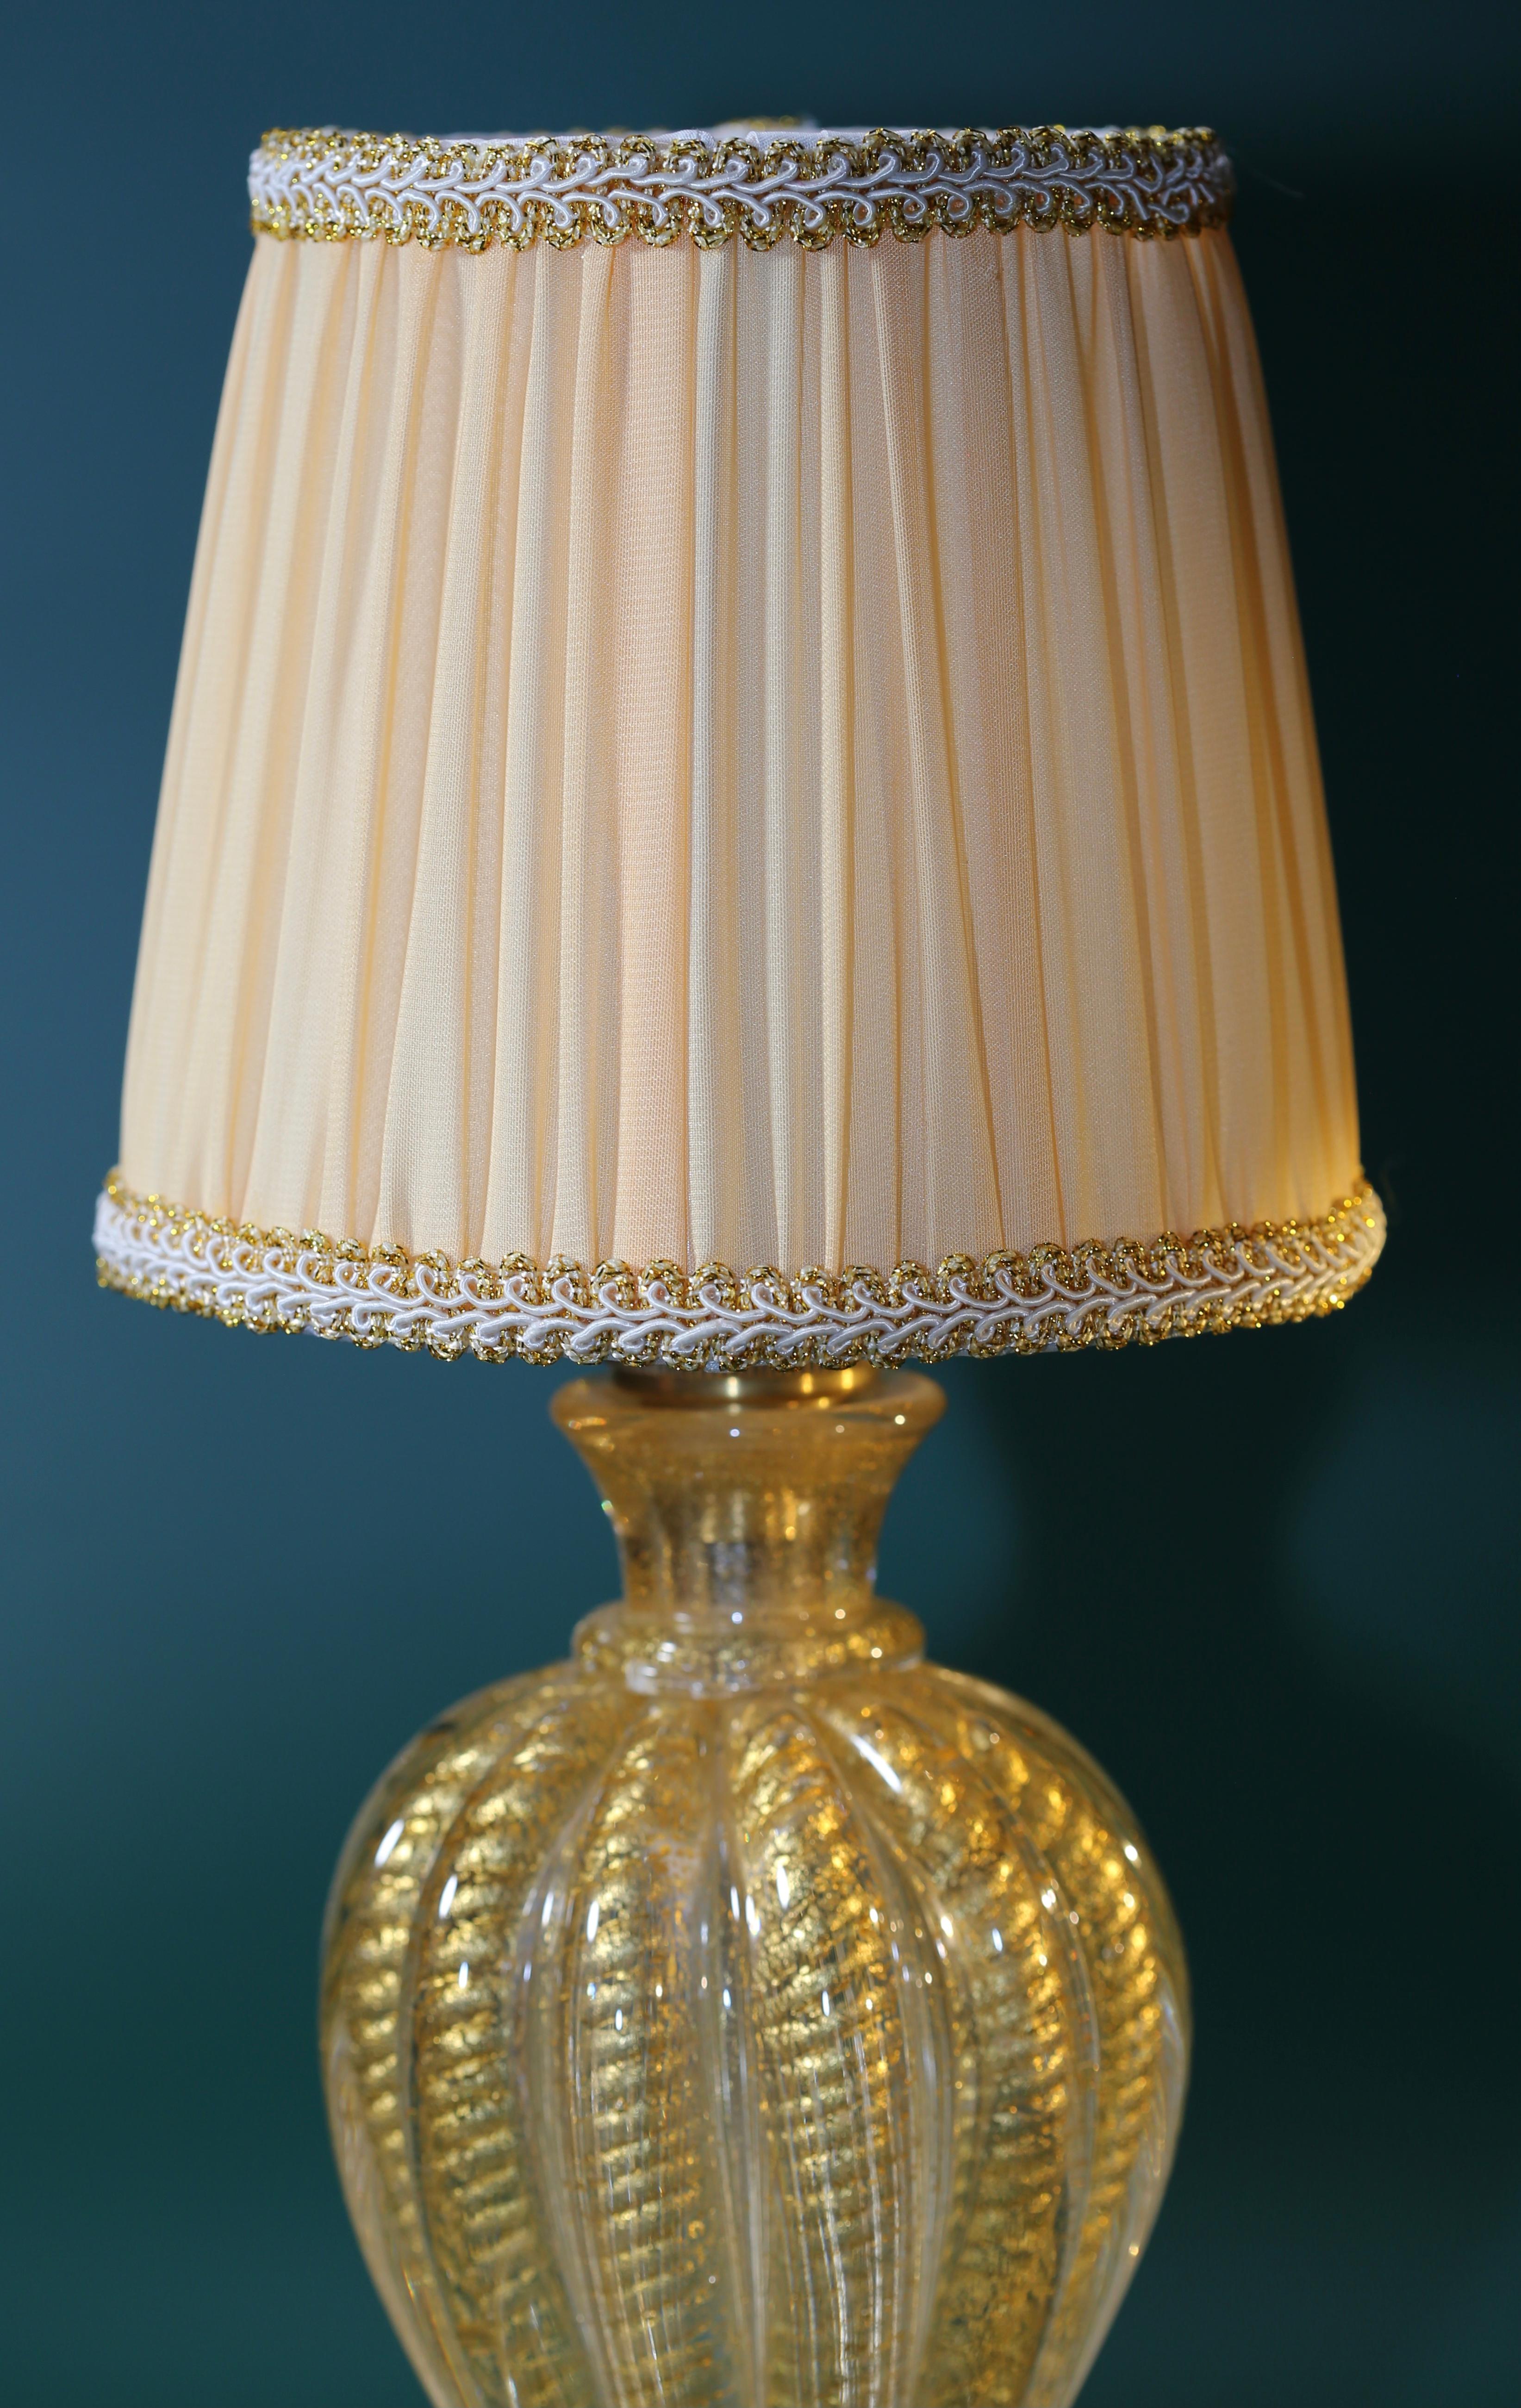 Early 20th Century Italian Murano Glass Art Lamp in Gold Color 1